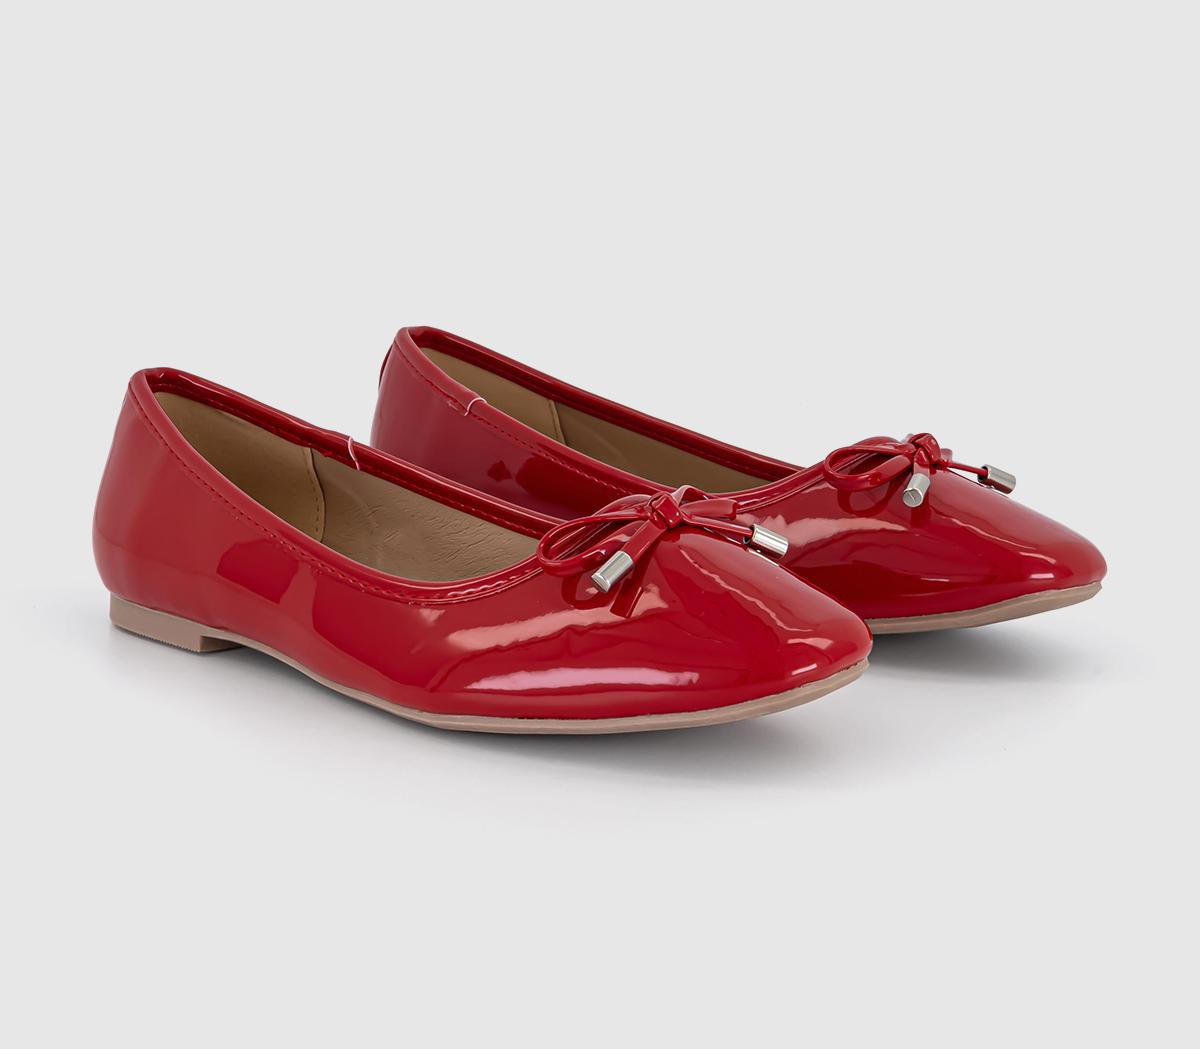 OFFICE Womens Flora Bow Detail Ballet Pumps Red Patent, 7